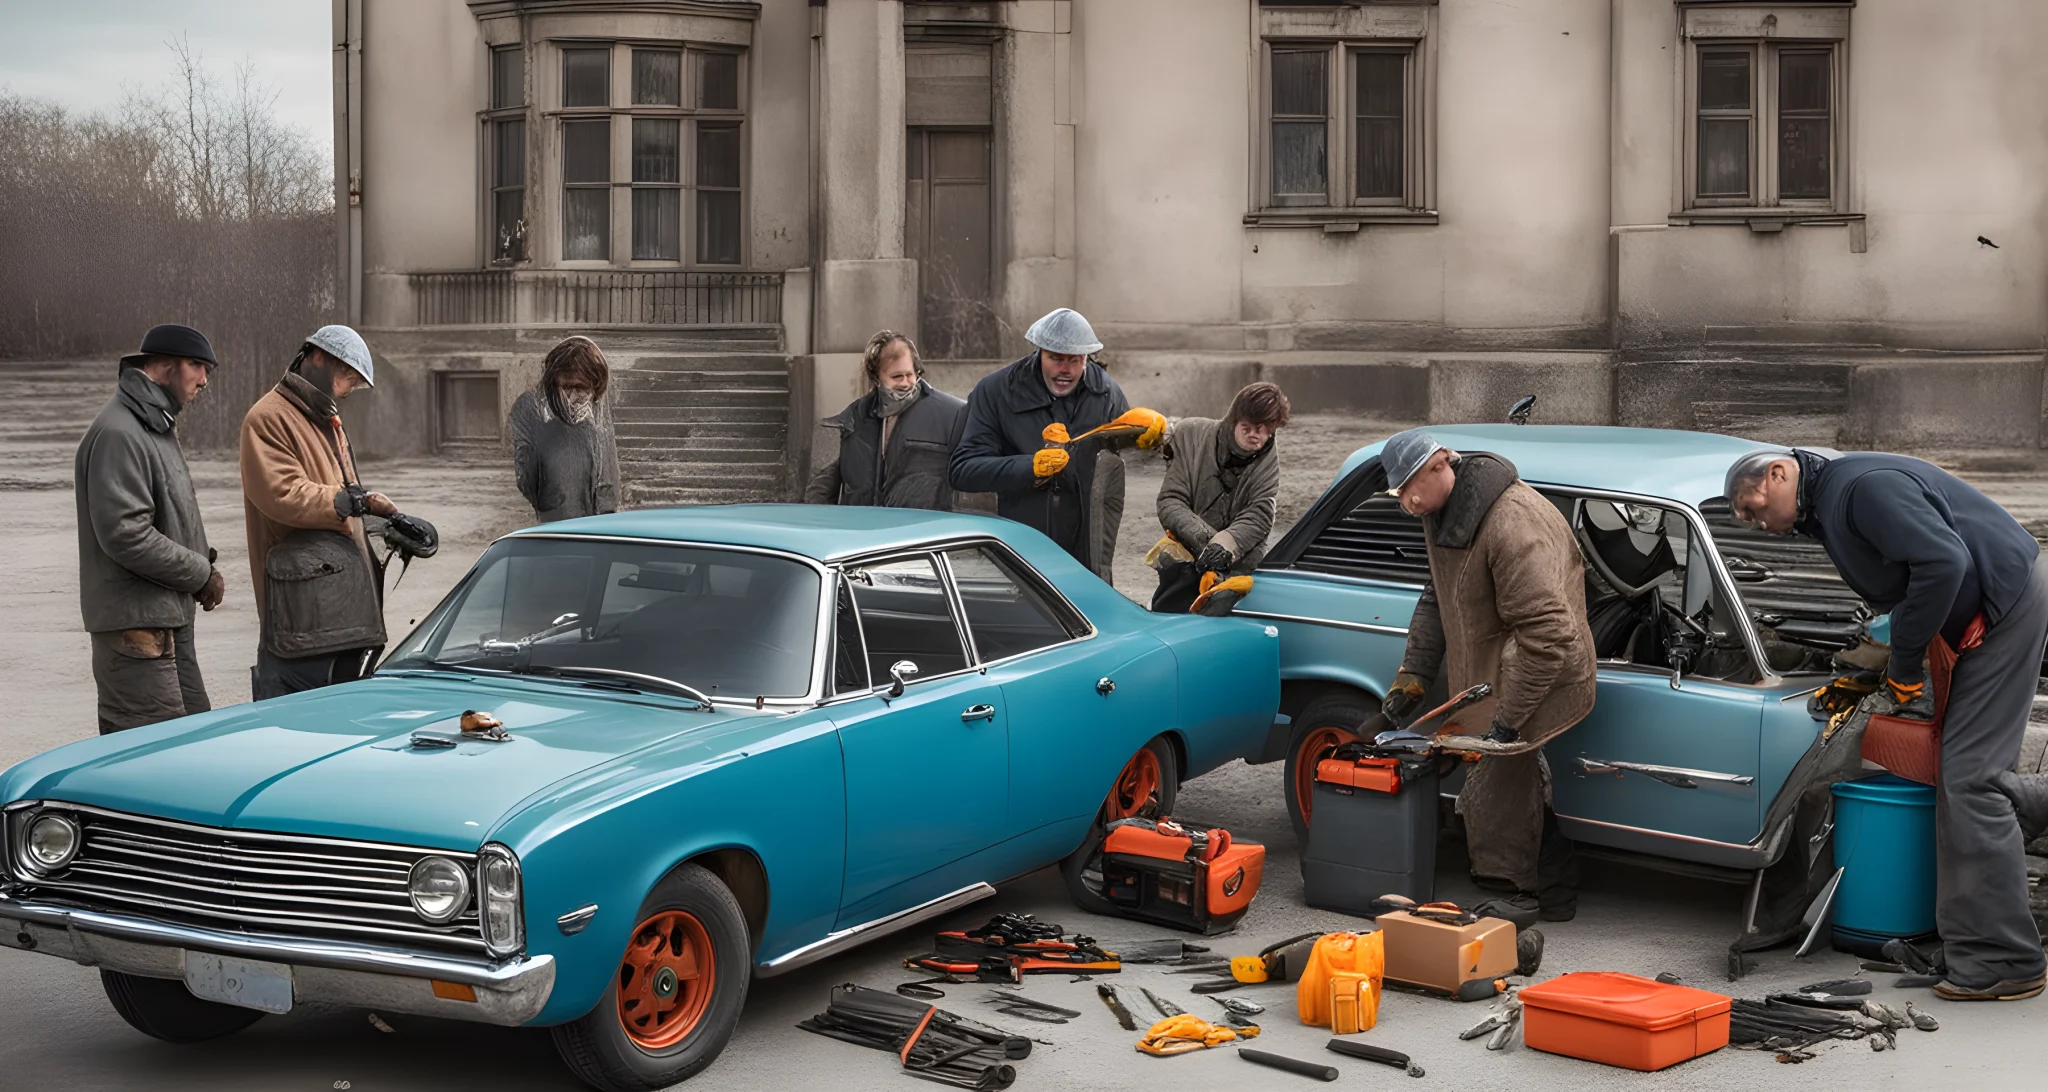 The image shows a group of people gathered around a car, with tools and maintenance equipment spread out on the ground.